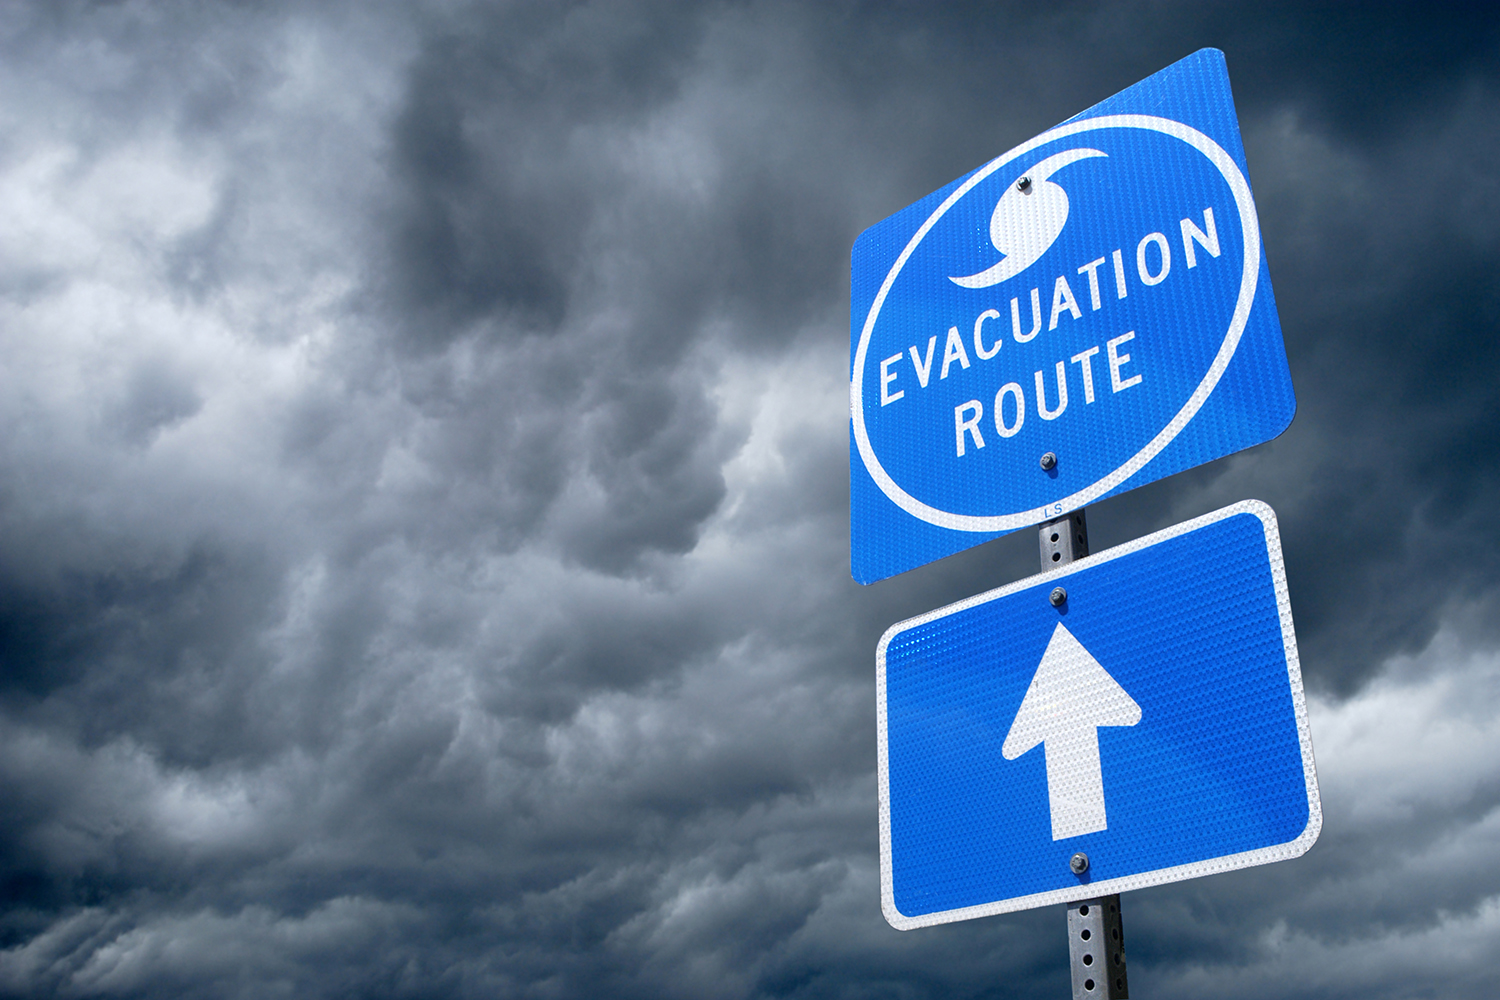 A Directional Sign in Front of Storm Clouds indicating the Storm Evacuation Route.